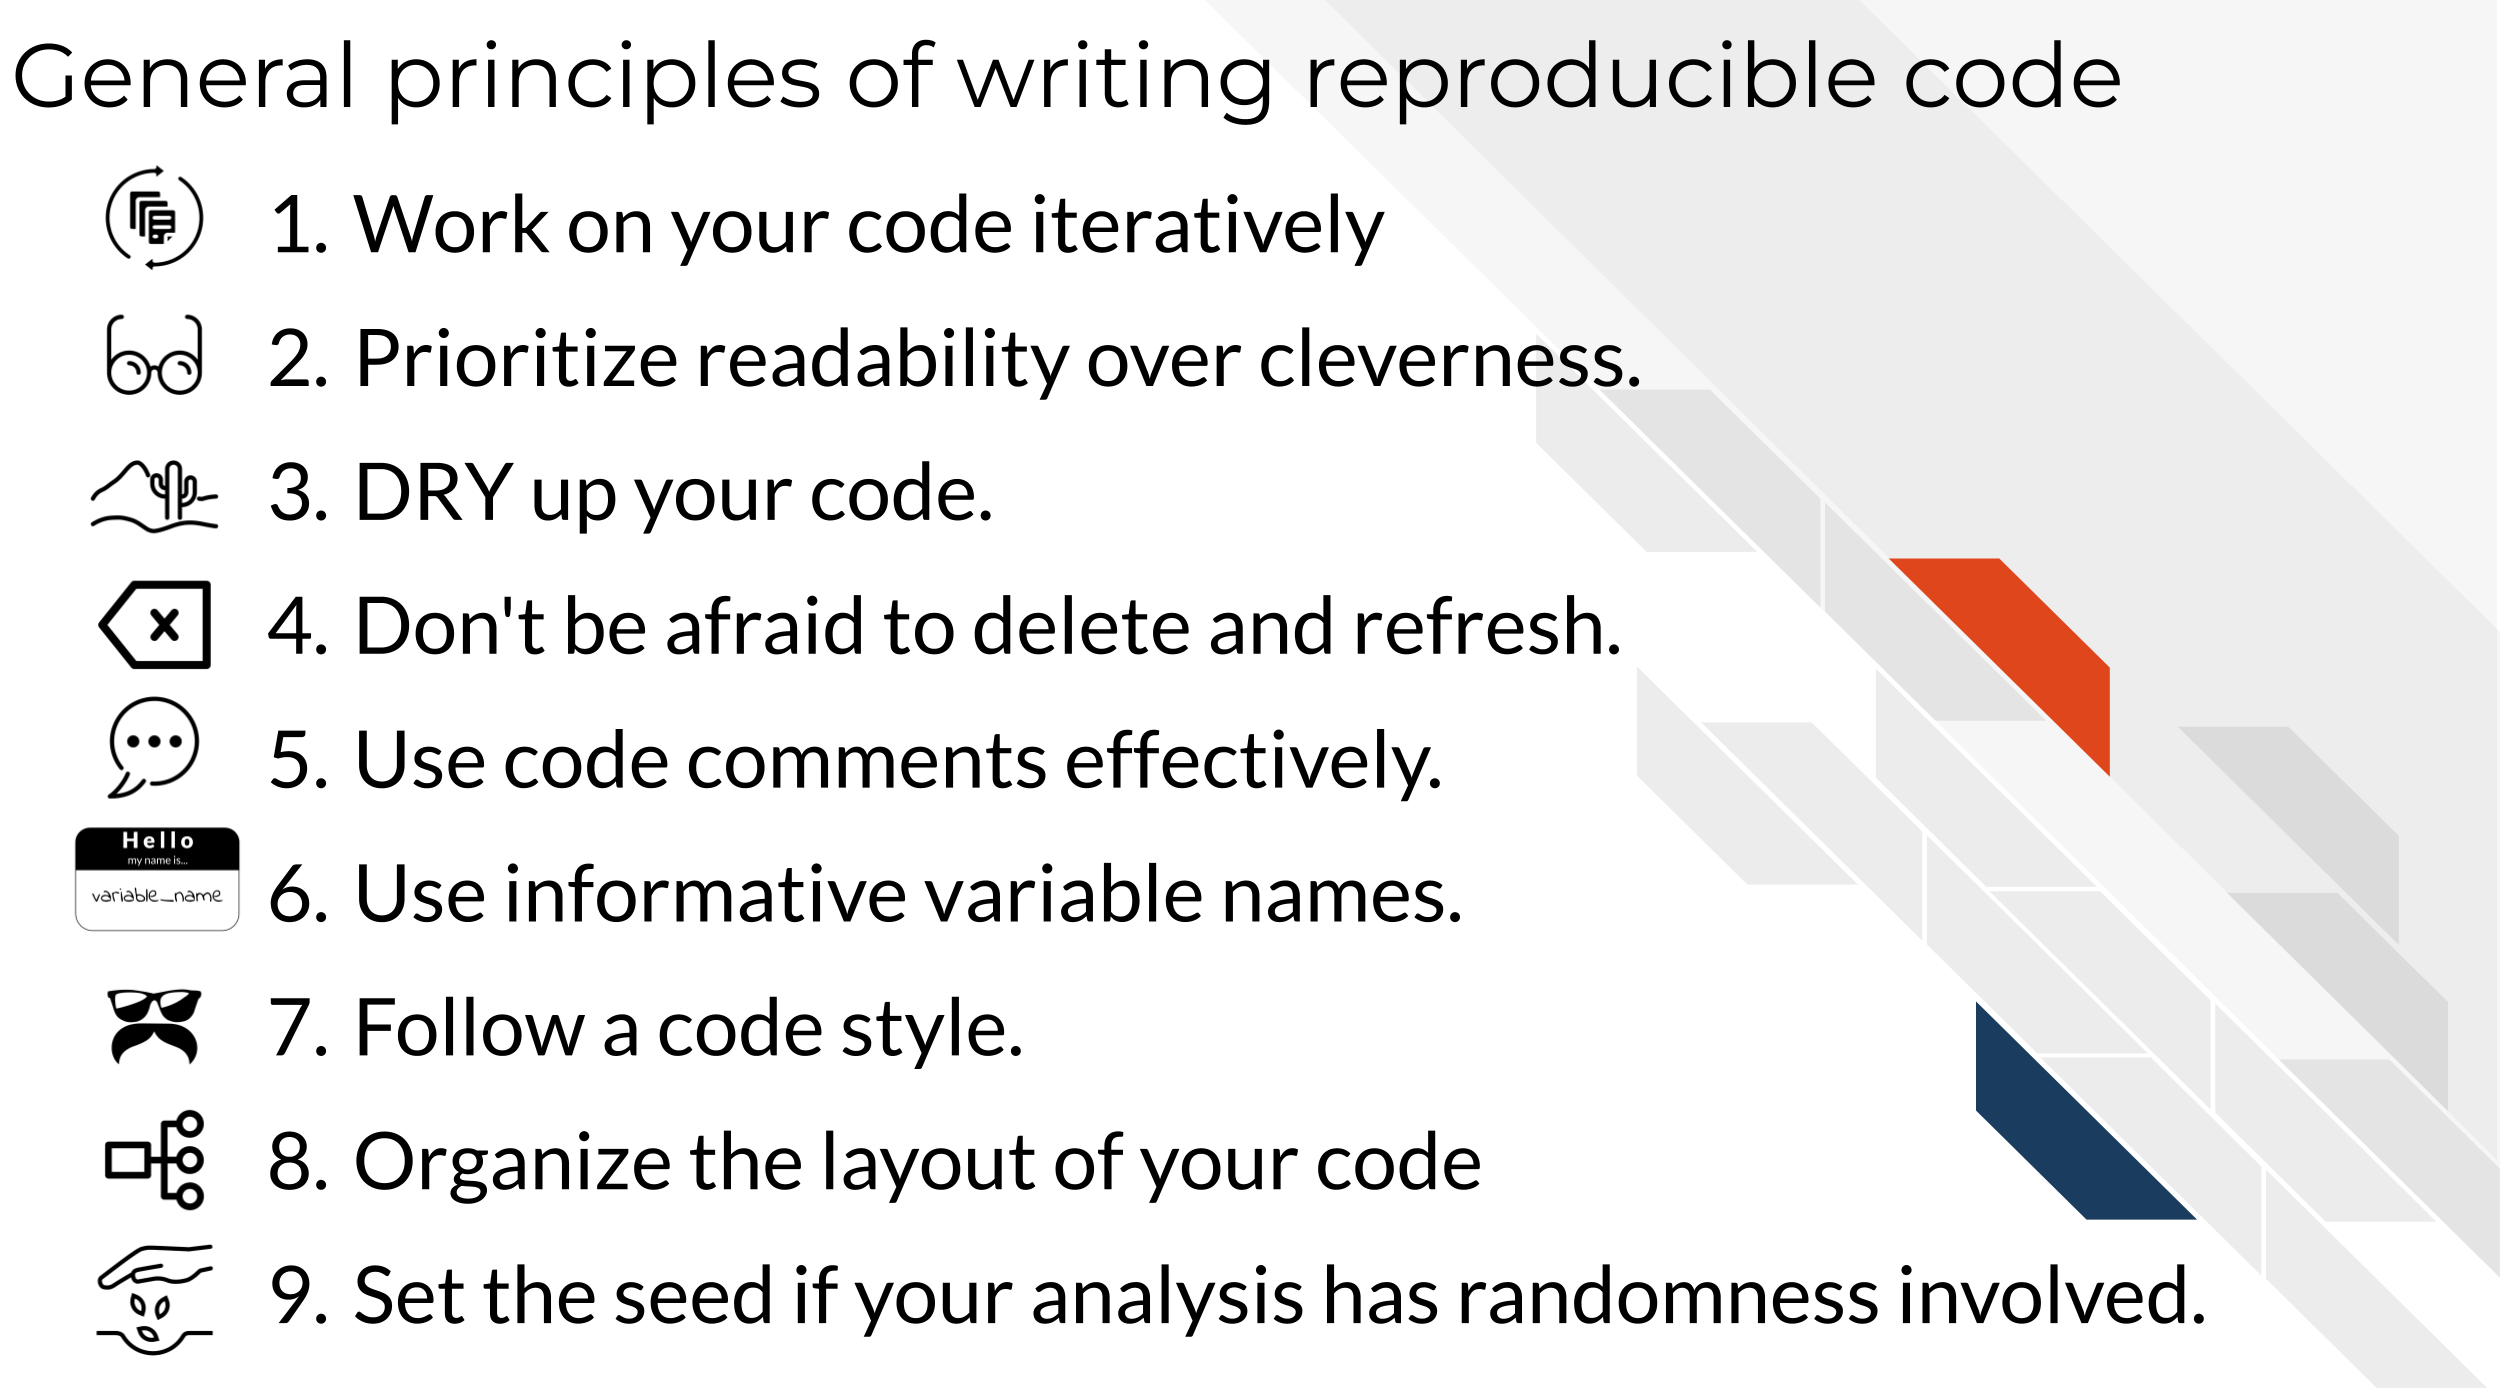 General principles of writing reproducible code. Work on your code iteratively. Prioritize readability over cleverness. DRY up your code. Don't be afraid to delete and refresh. Use code comments effectively. Use informative variable names. Follow a code style.